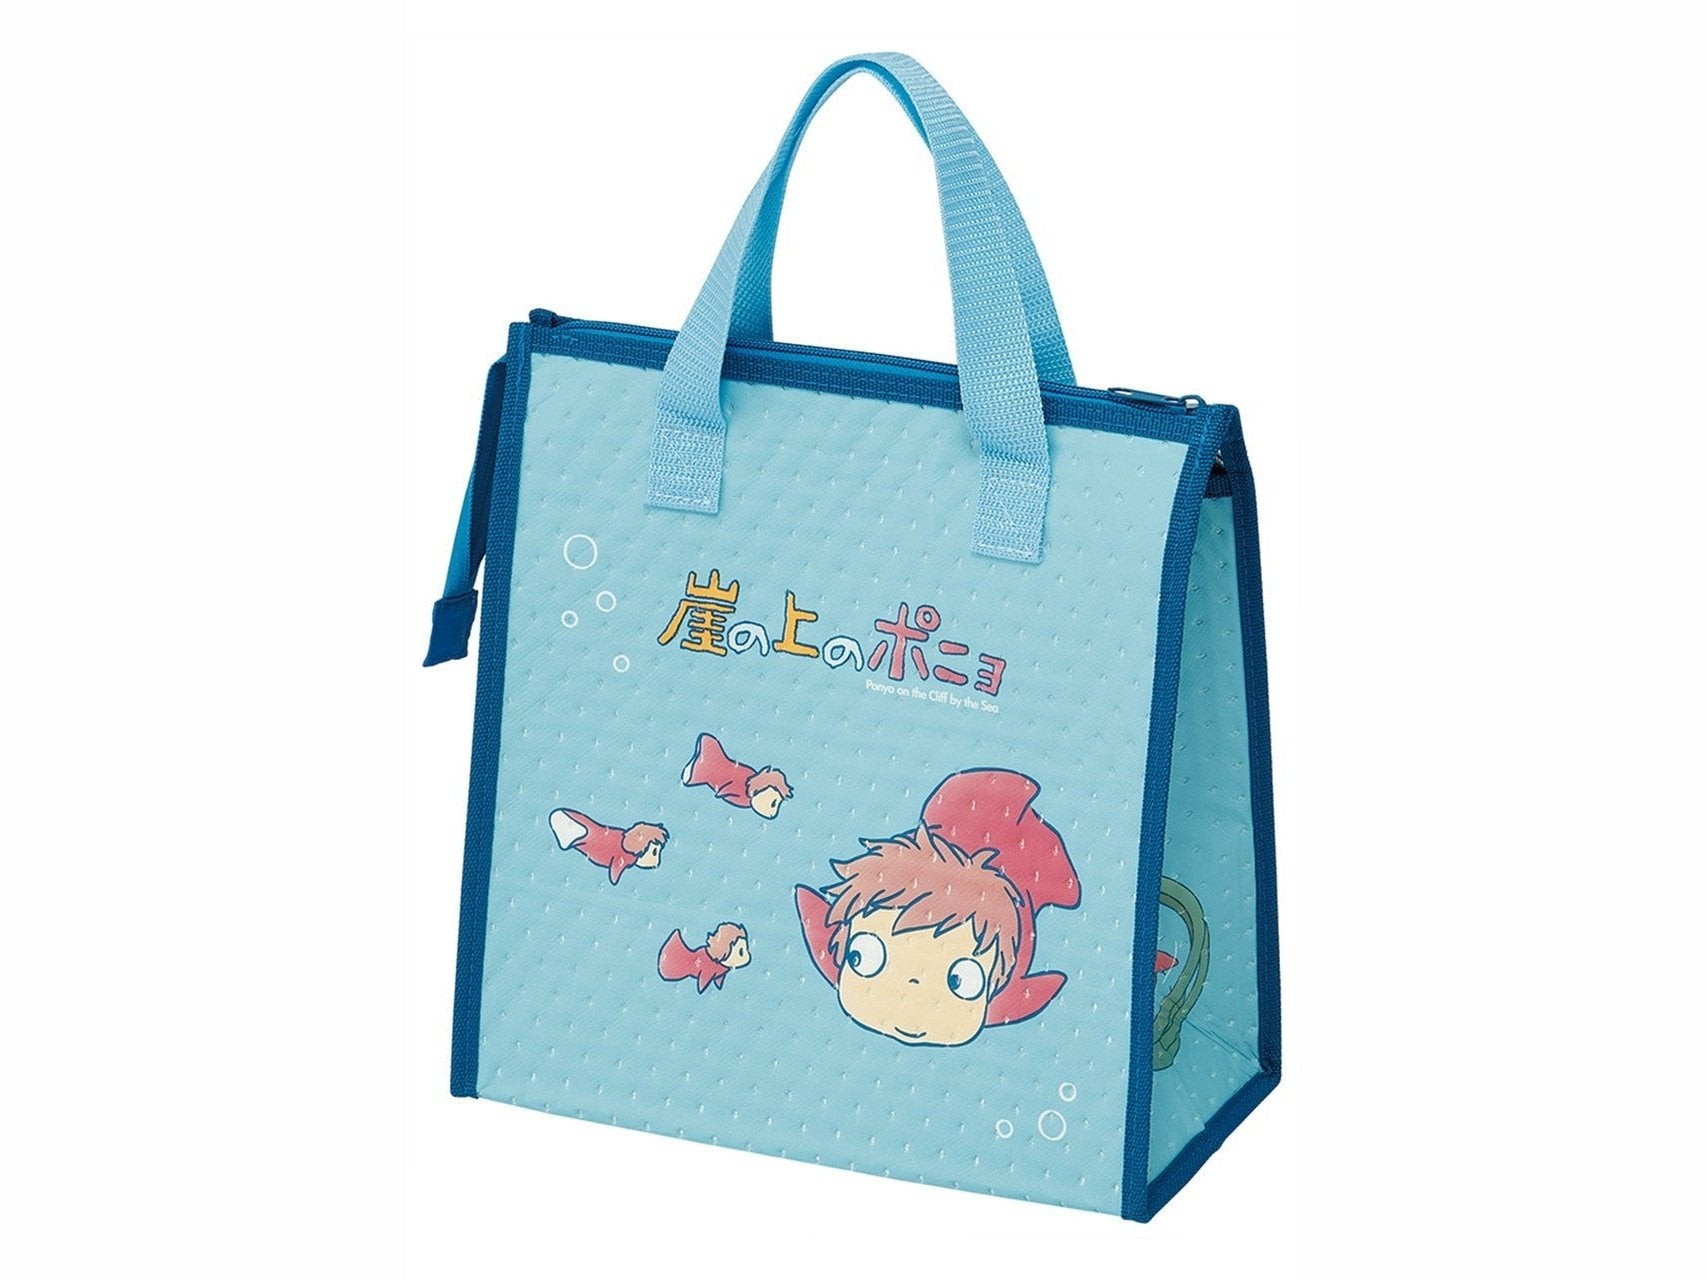 Skater Ponyo Insulated Tote Lunch Bag